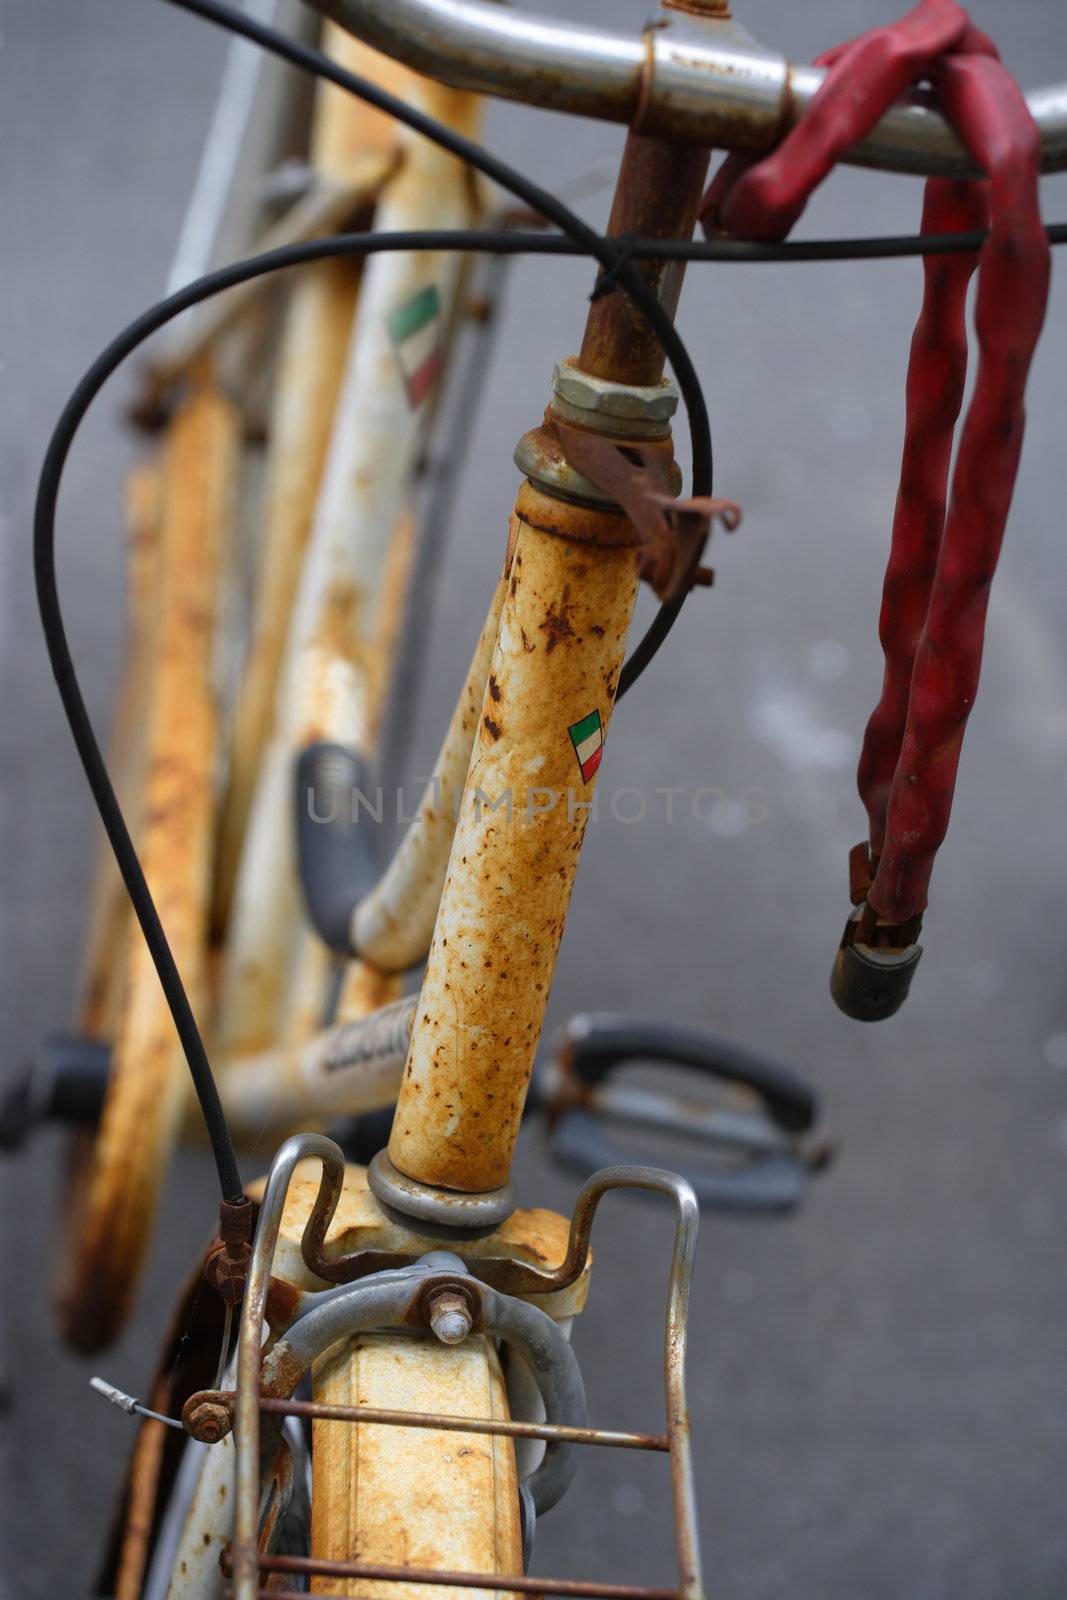 An old rusty bicycle in Italy.
